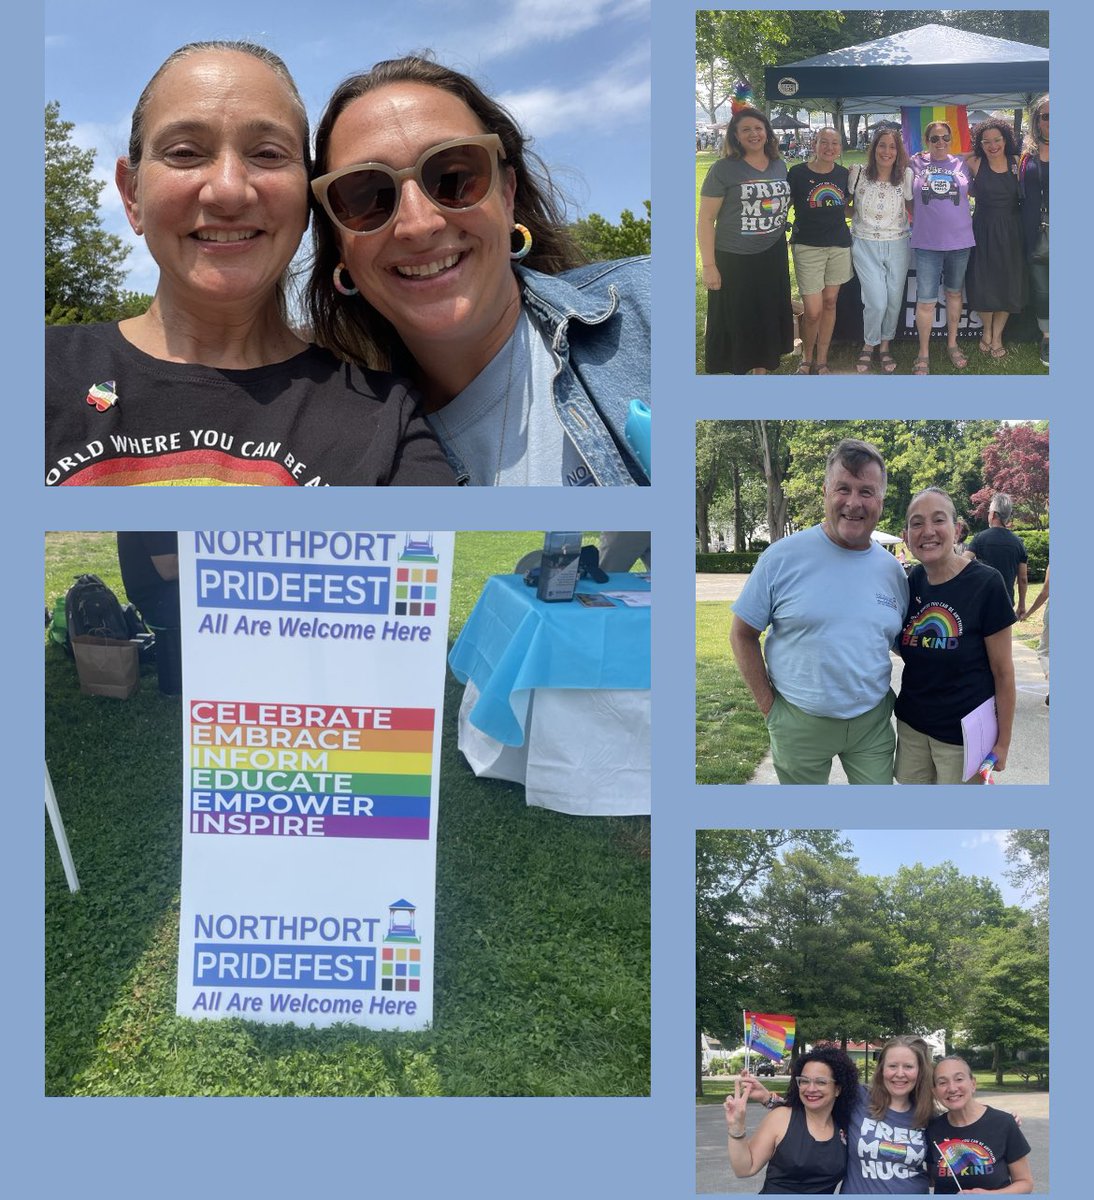 The first annual  Northport Pridefest was a tremendous success with a spirit of love, support and community in the air. Congratulations to the event organizers and to all the volunteers who worked so hard to make this happen! 
♥️🧡💛💚💙💜